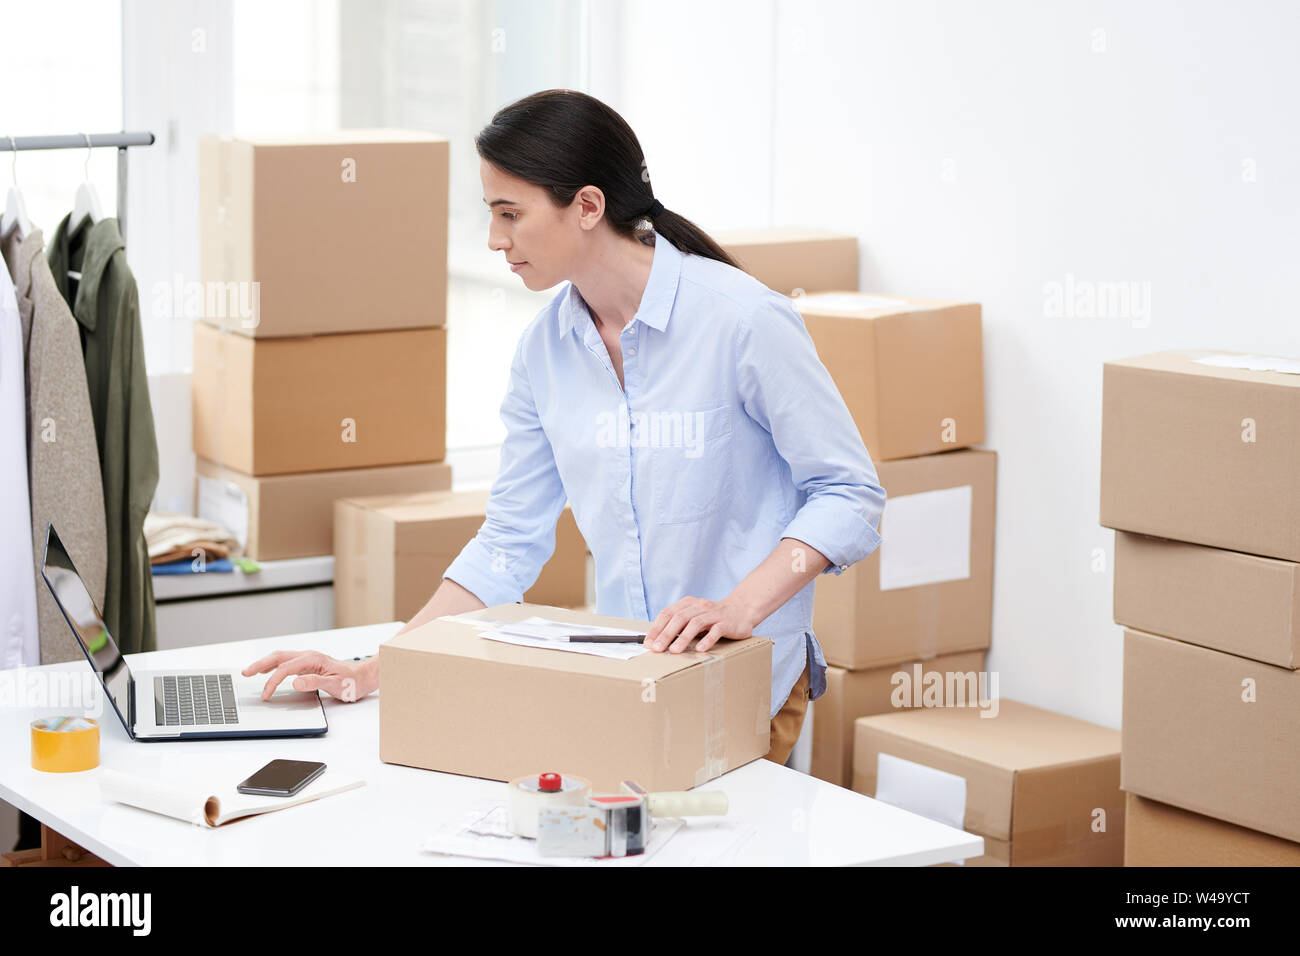 Busy manager of oline shop with packed box looking through order information Stock Photo